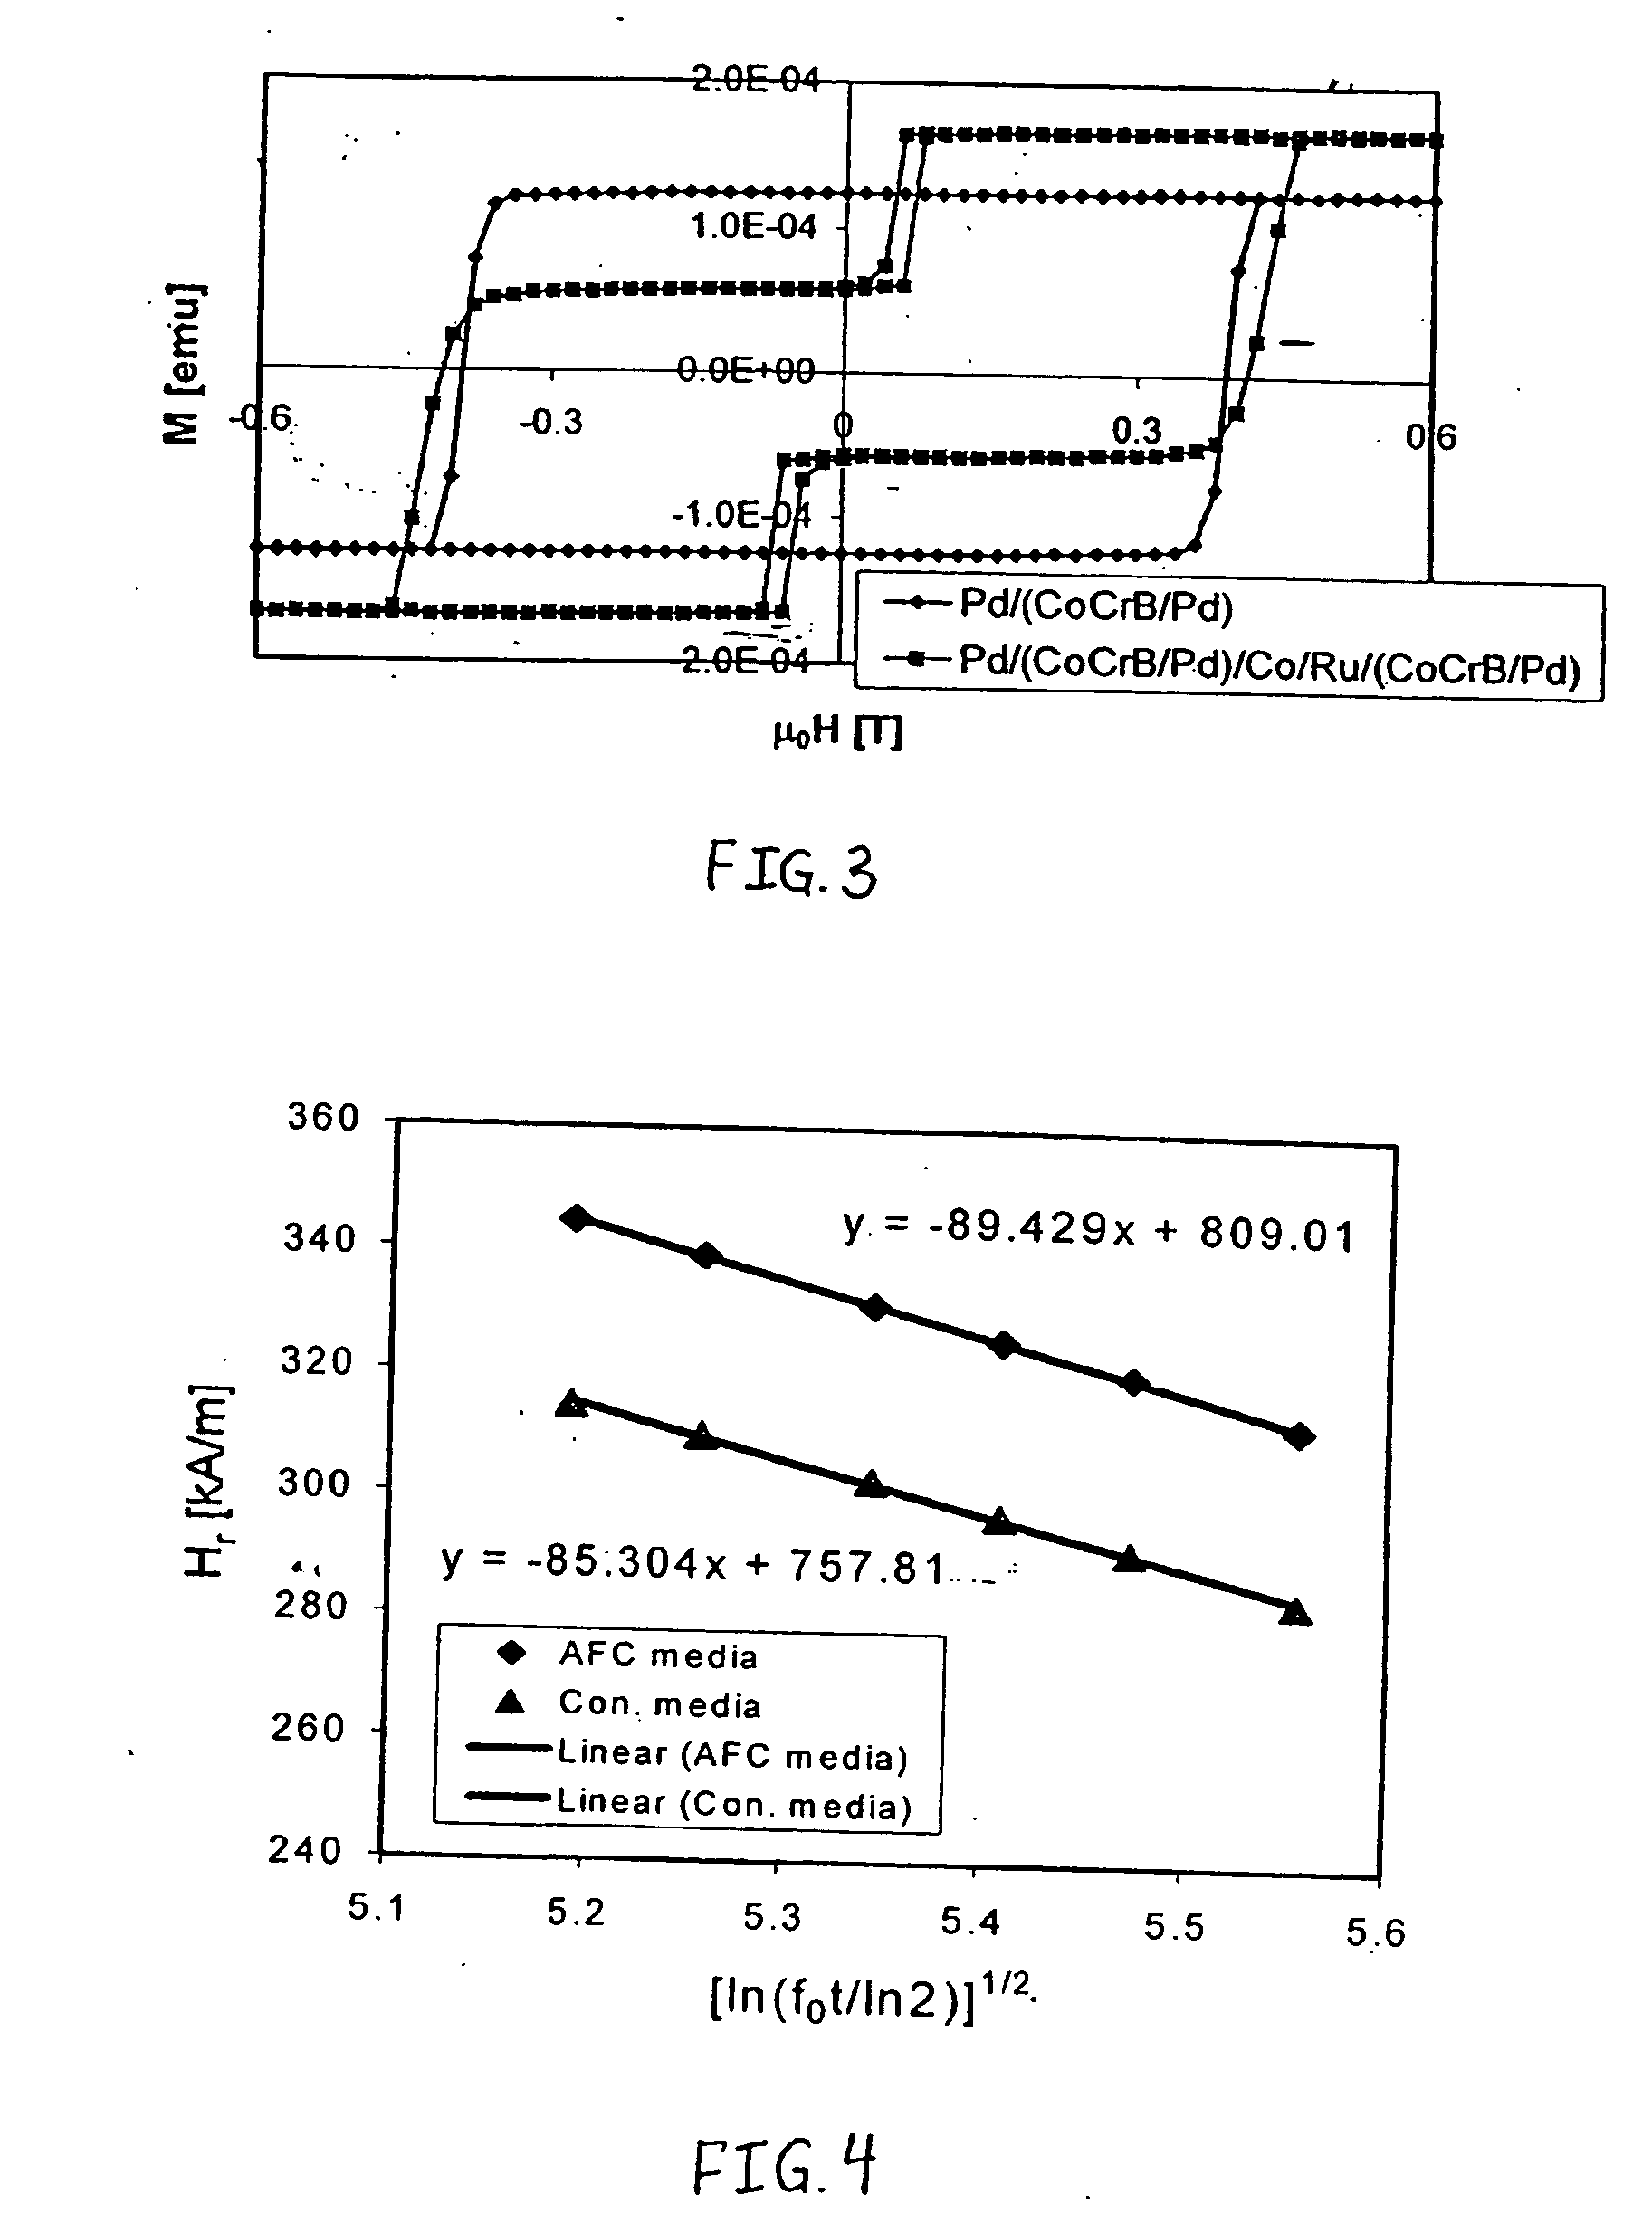 Anti-ferromagnetically coupled perpendicular magnetic recording media with oxide